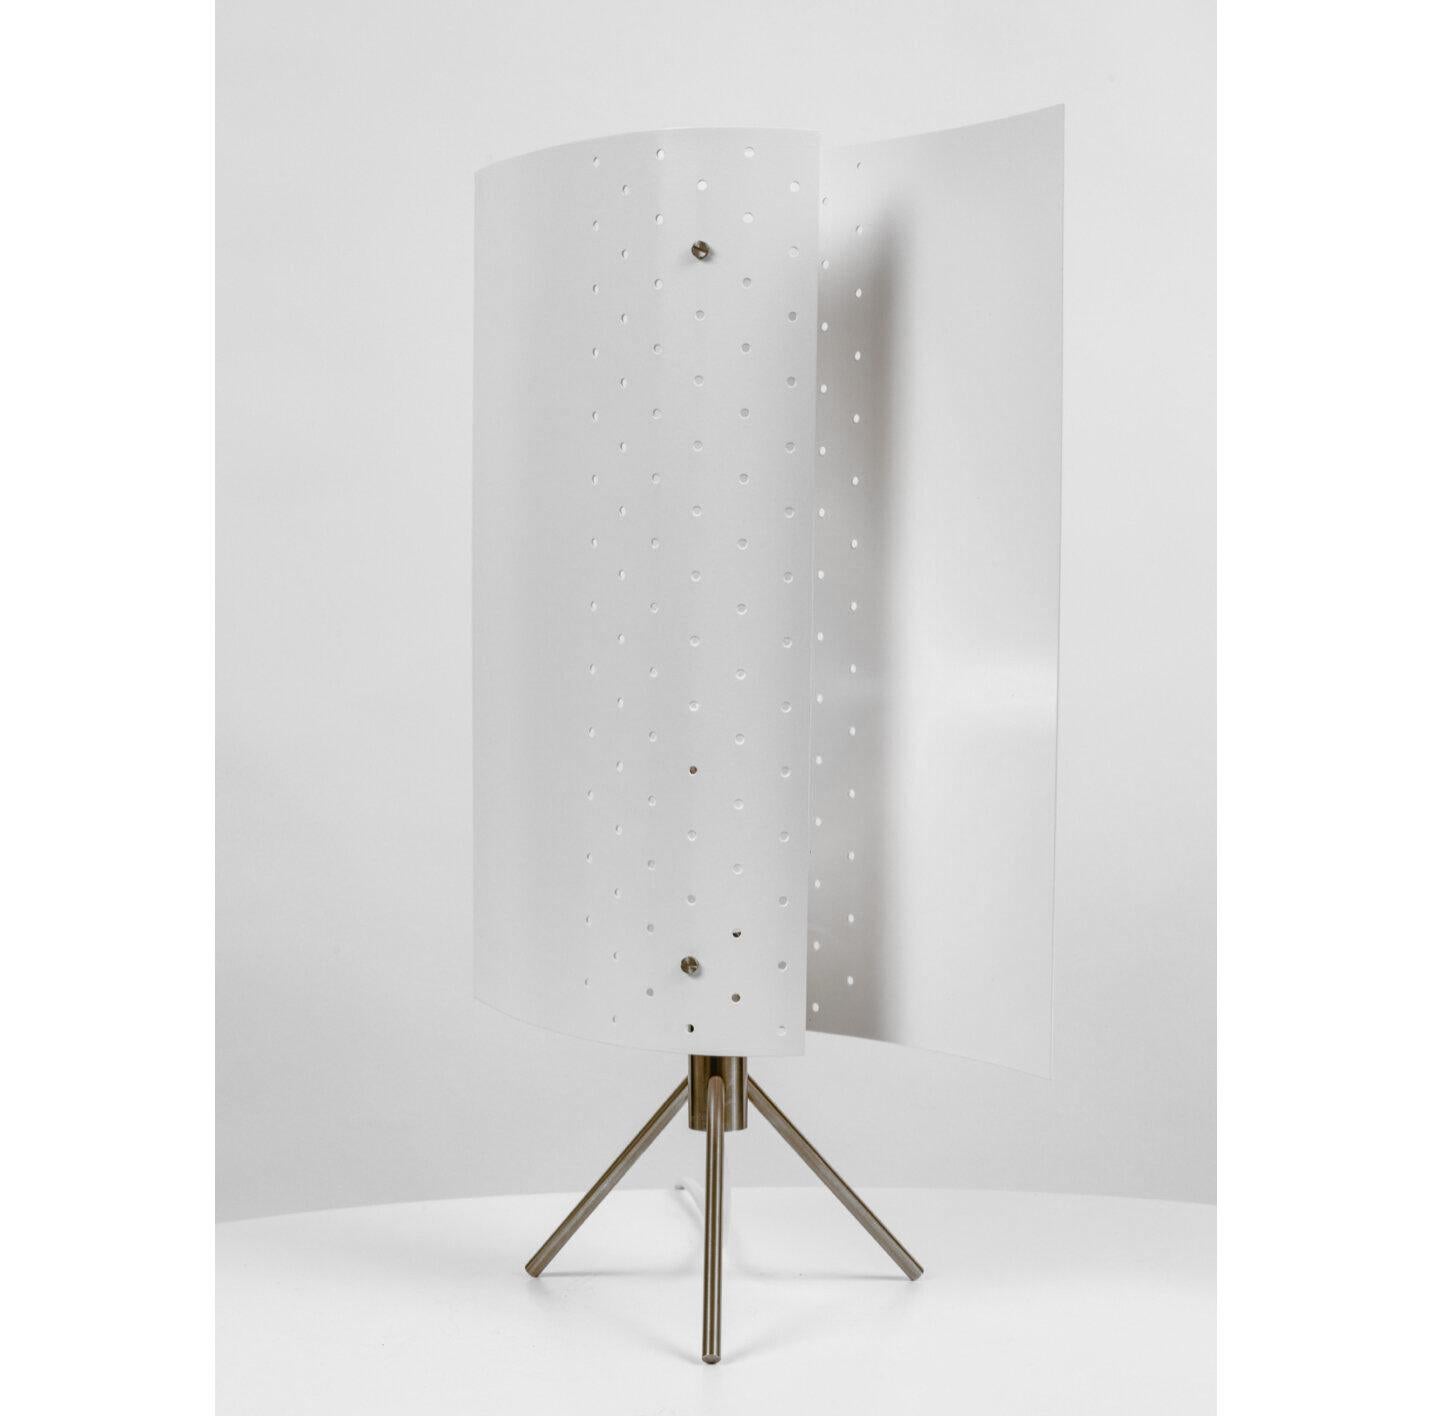 Lacquered Michel Buffet Mid-Century Modern White B207 Desk Lamp Re-Edition